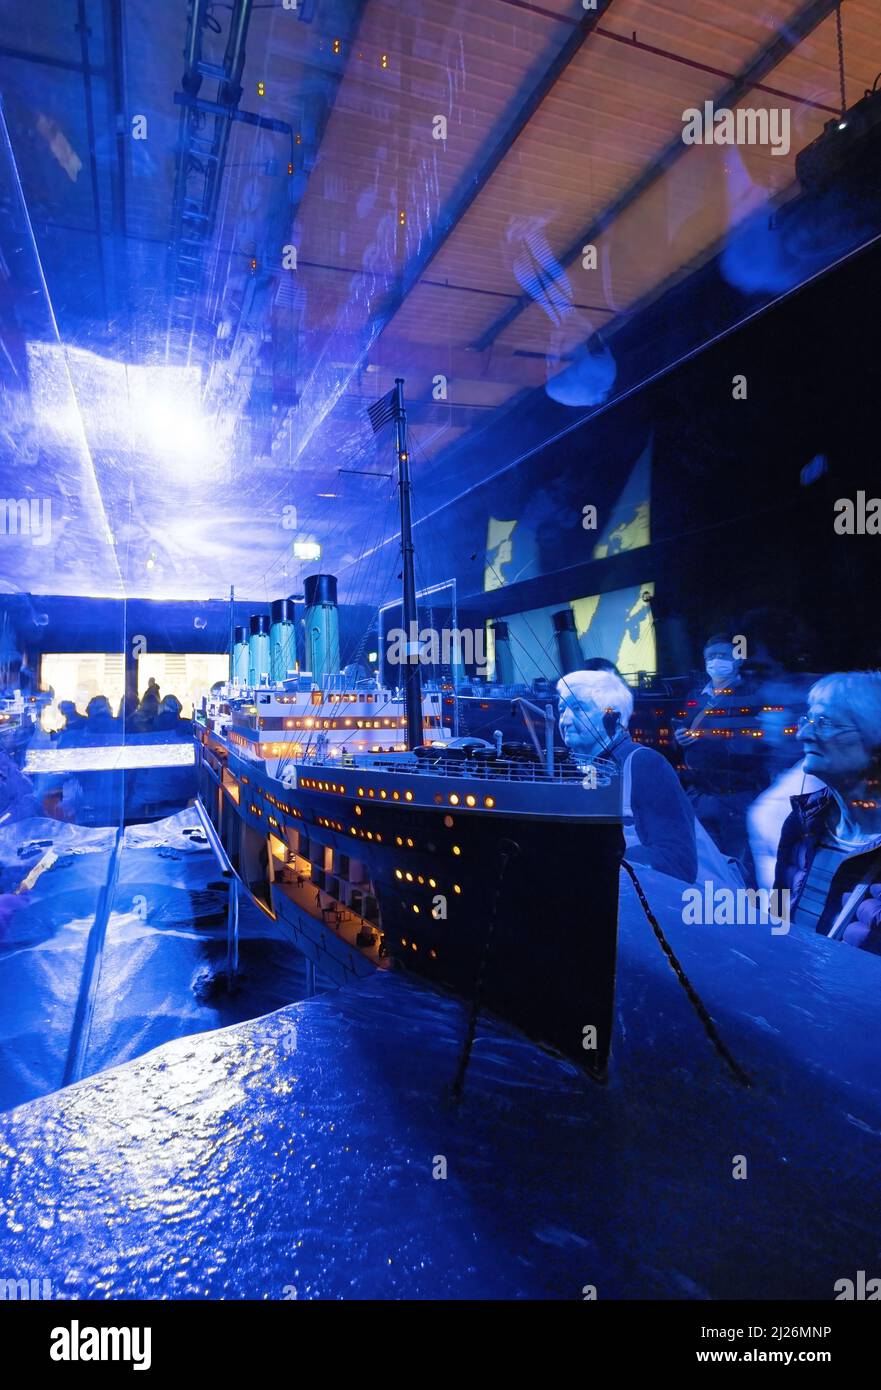 The Titanic sinking - people looking at a Titanic ship model, The Titanic Exhibition, London UK Stock Photo